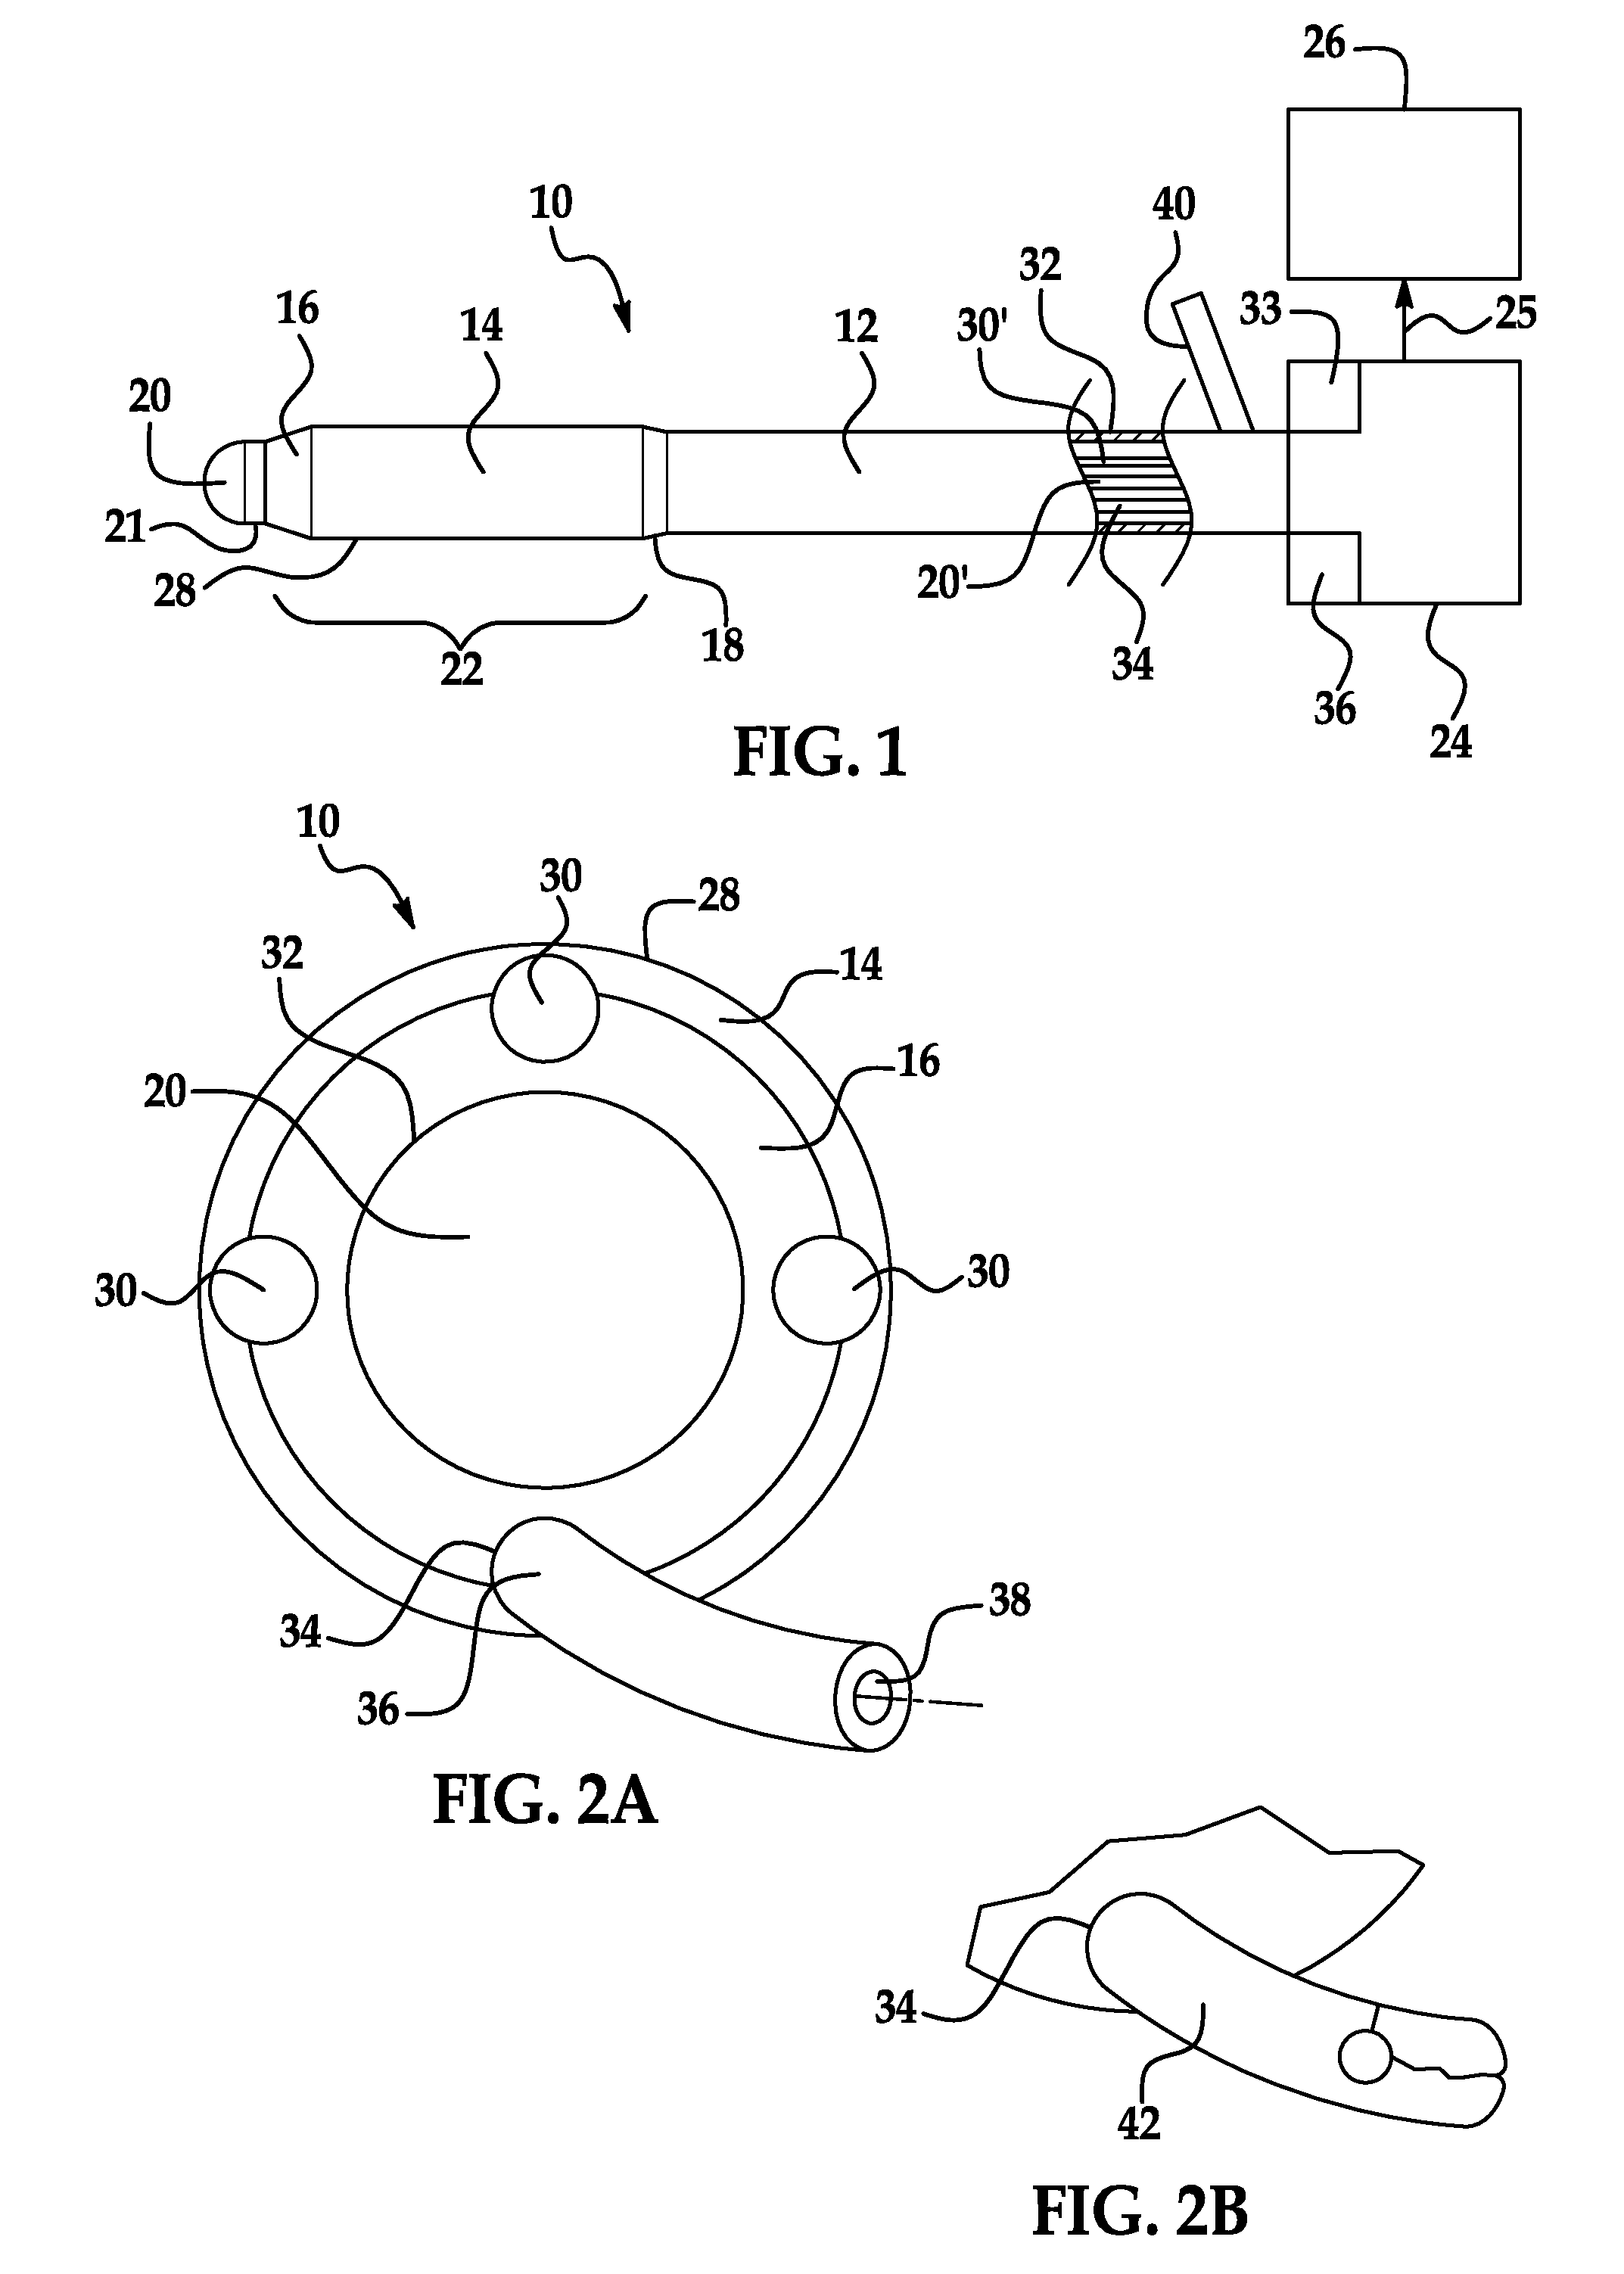 Device and process to confirm occlusion of the fallopian tube